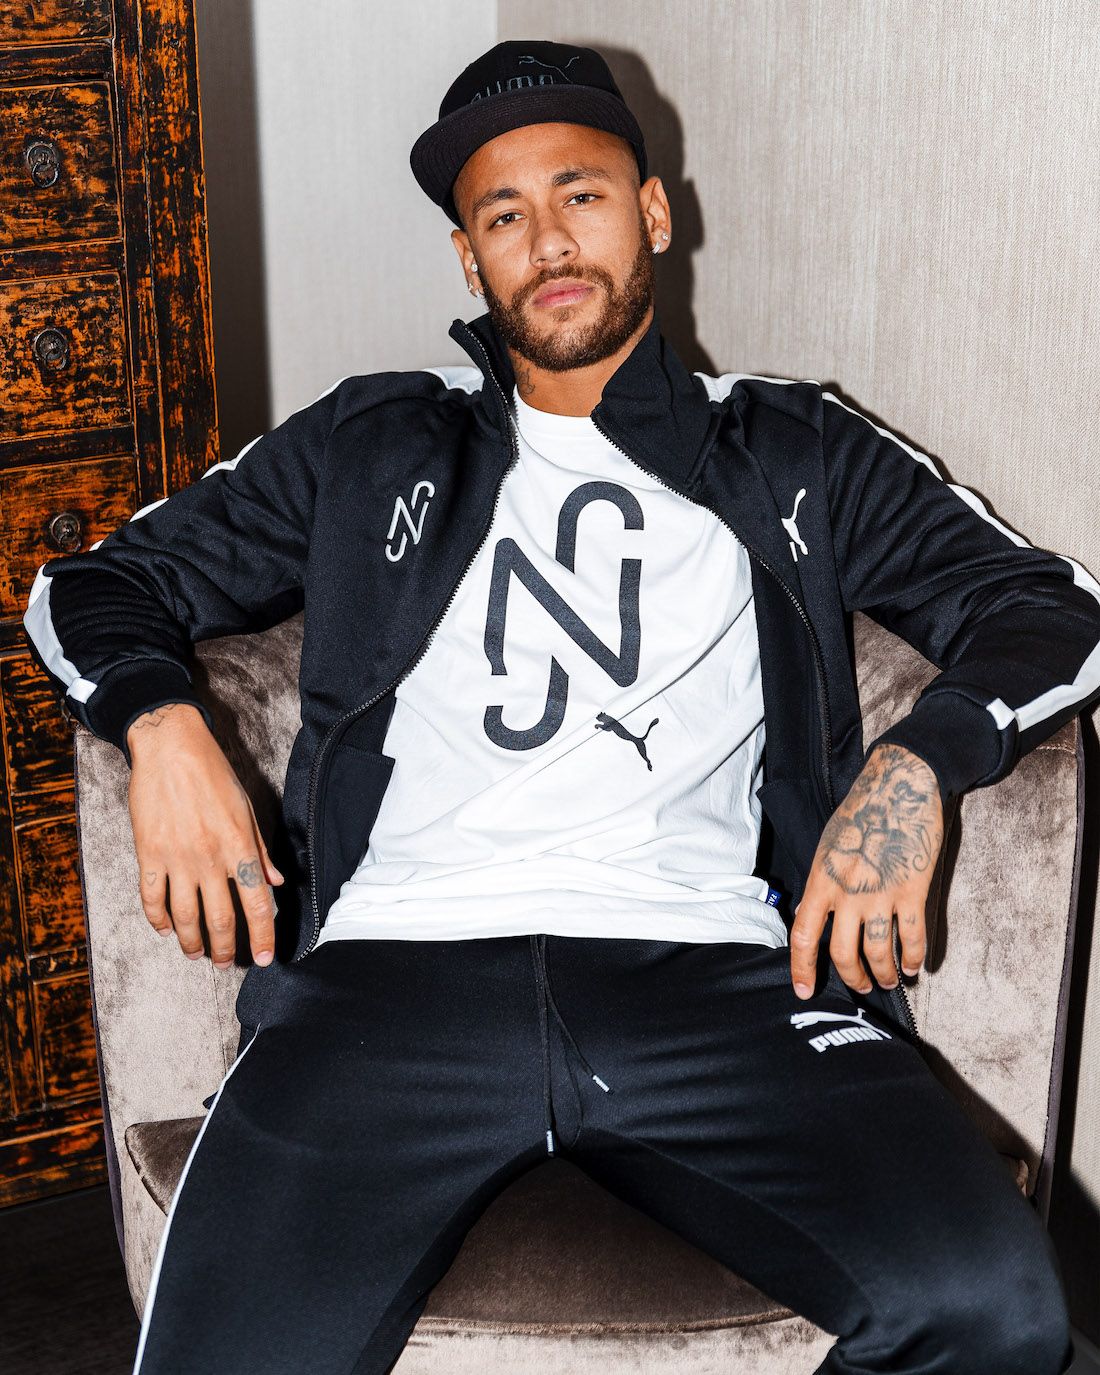 You can't say Ney to these styles 👕 @neymarjr Cop the latest Neymar Jr.  collection on PUMA.com or head to the link in the bio. #PUMA…